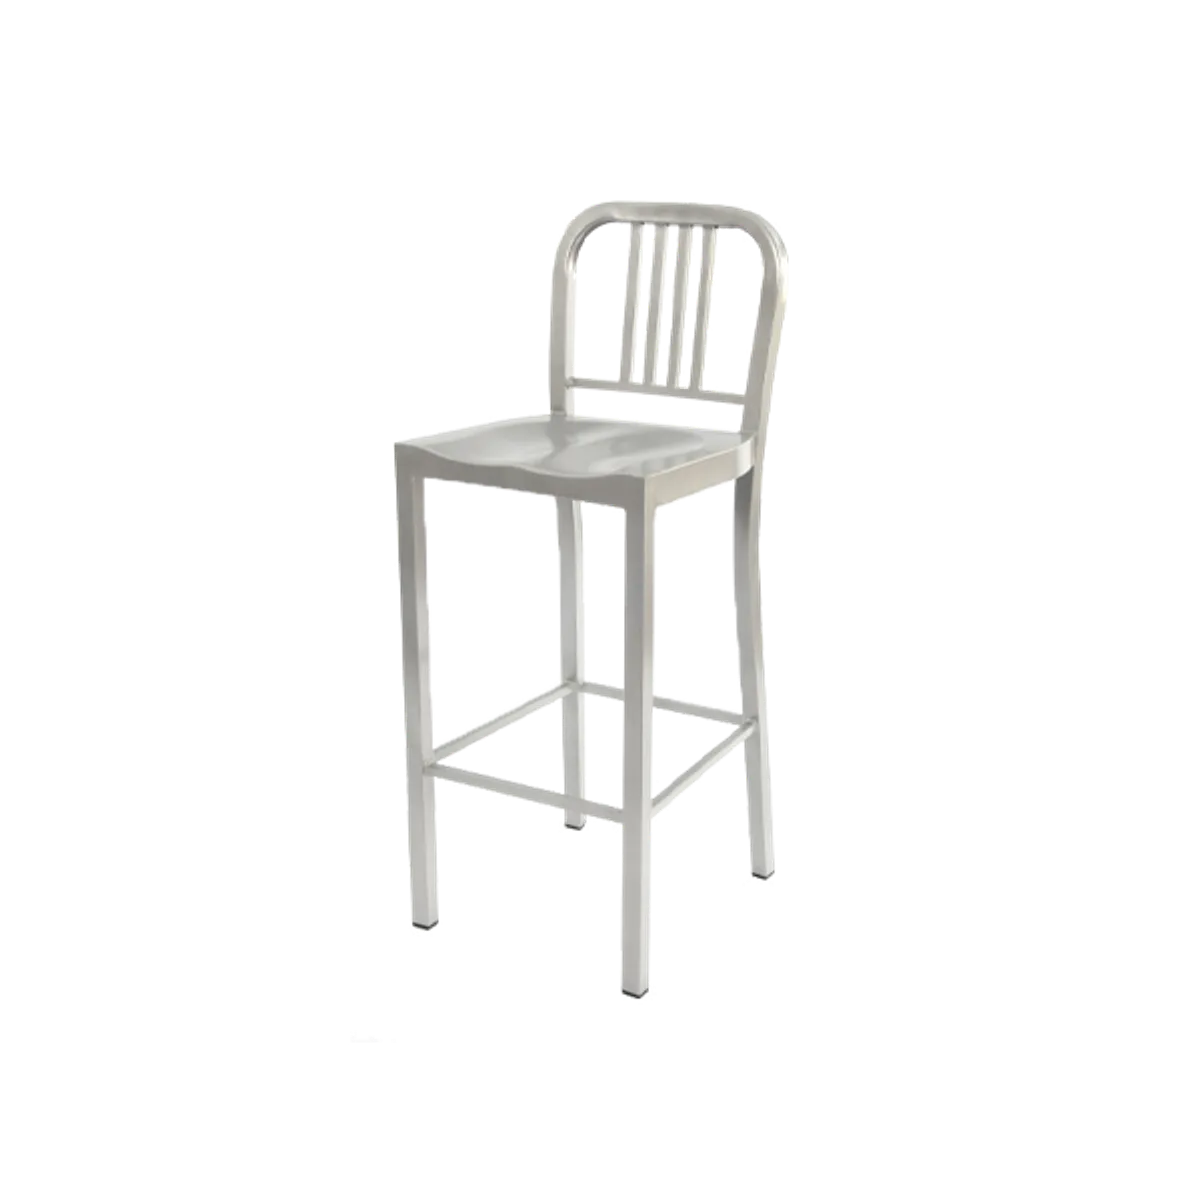 Anchor Bar Stool Industrial Furniture Inside Out Contracts